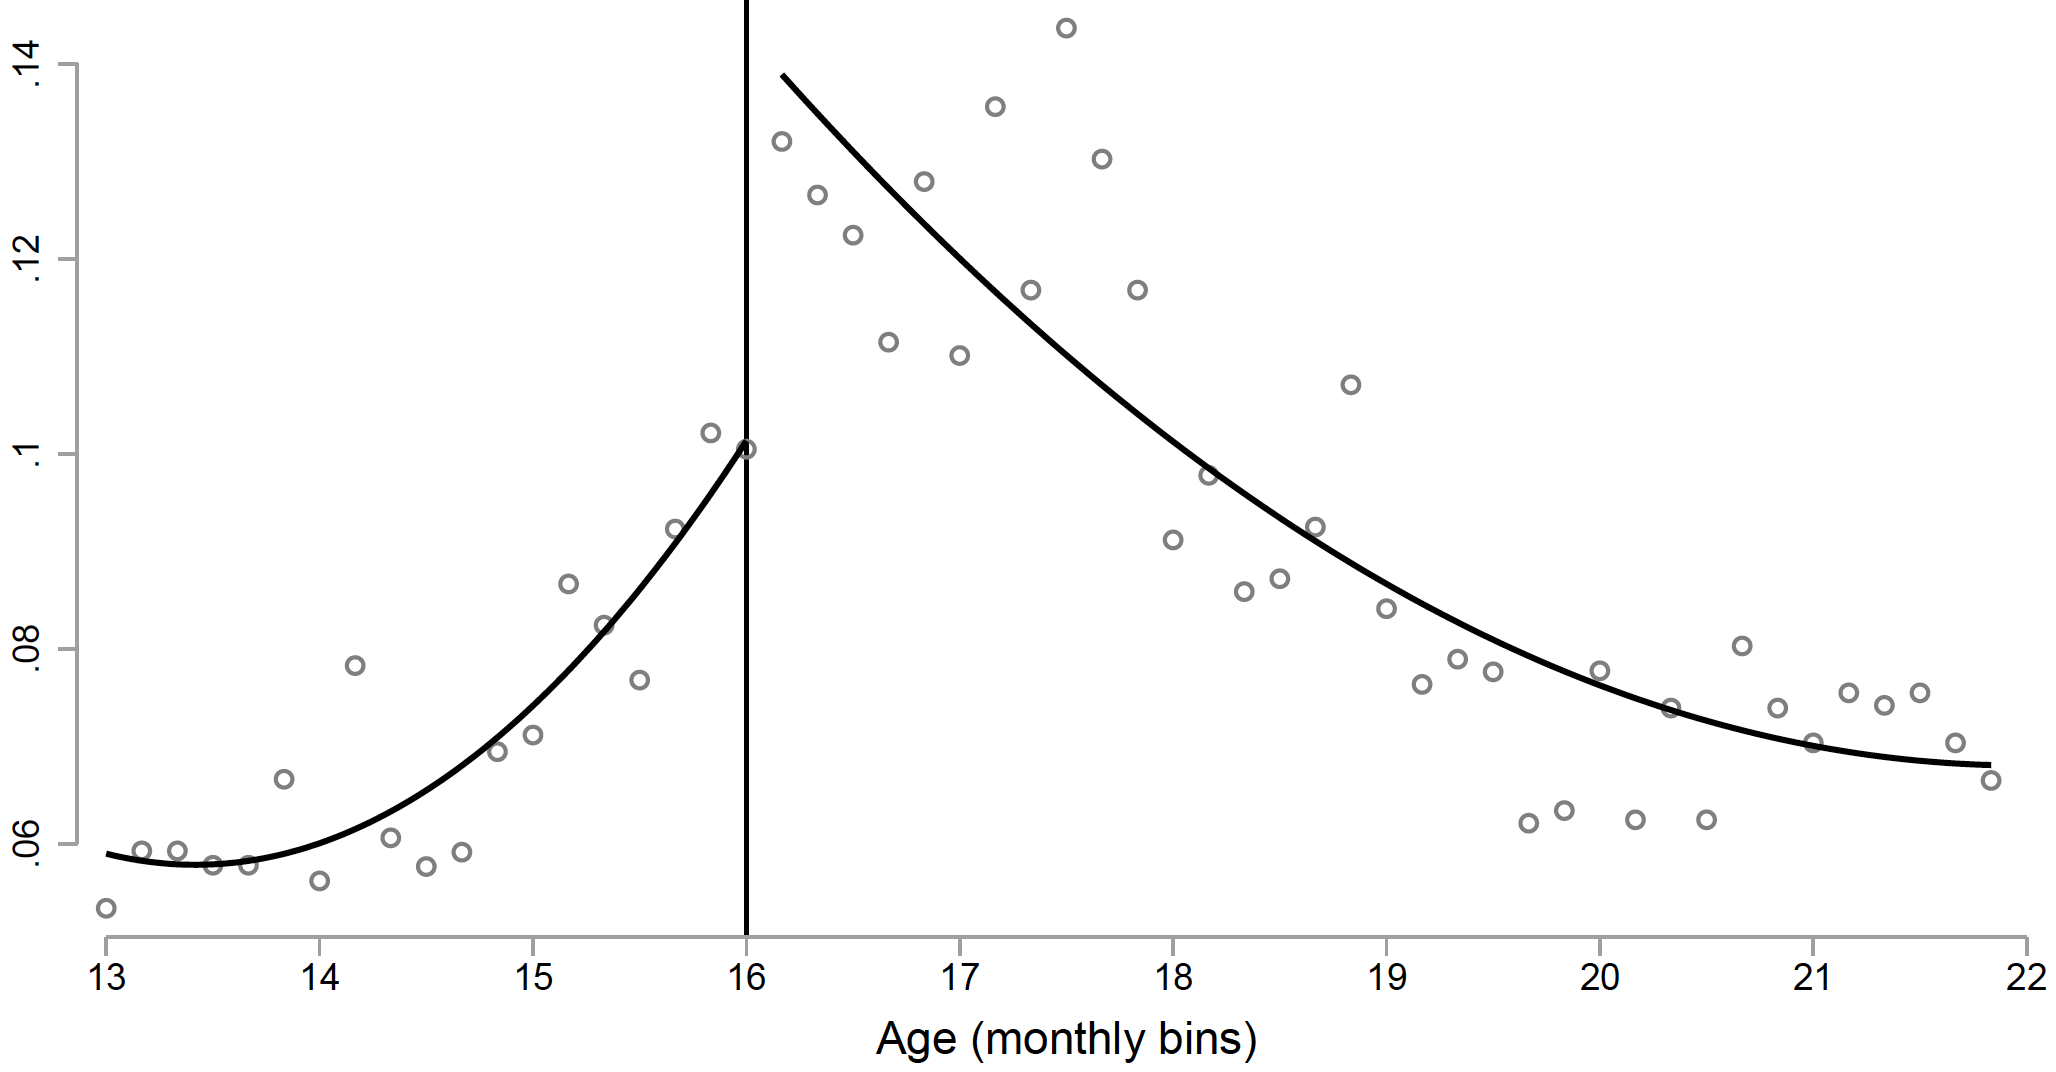 Minimum legal drinking age and the social gradient in binge drinking 5